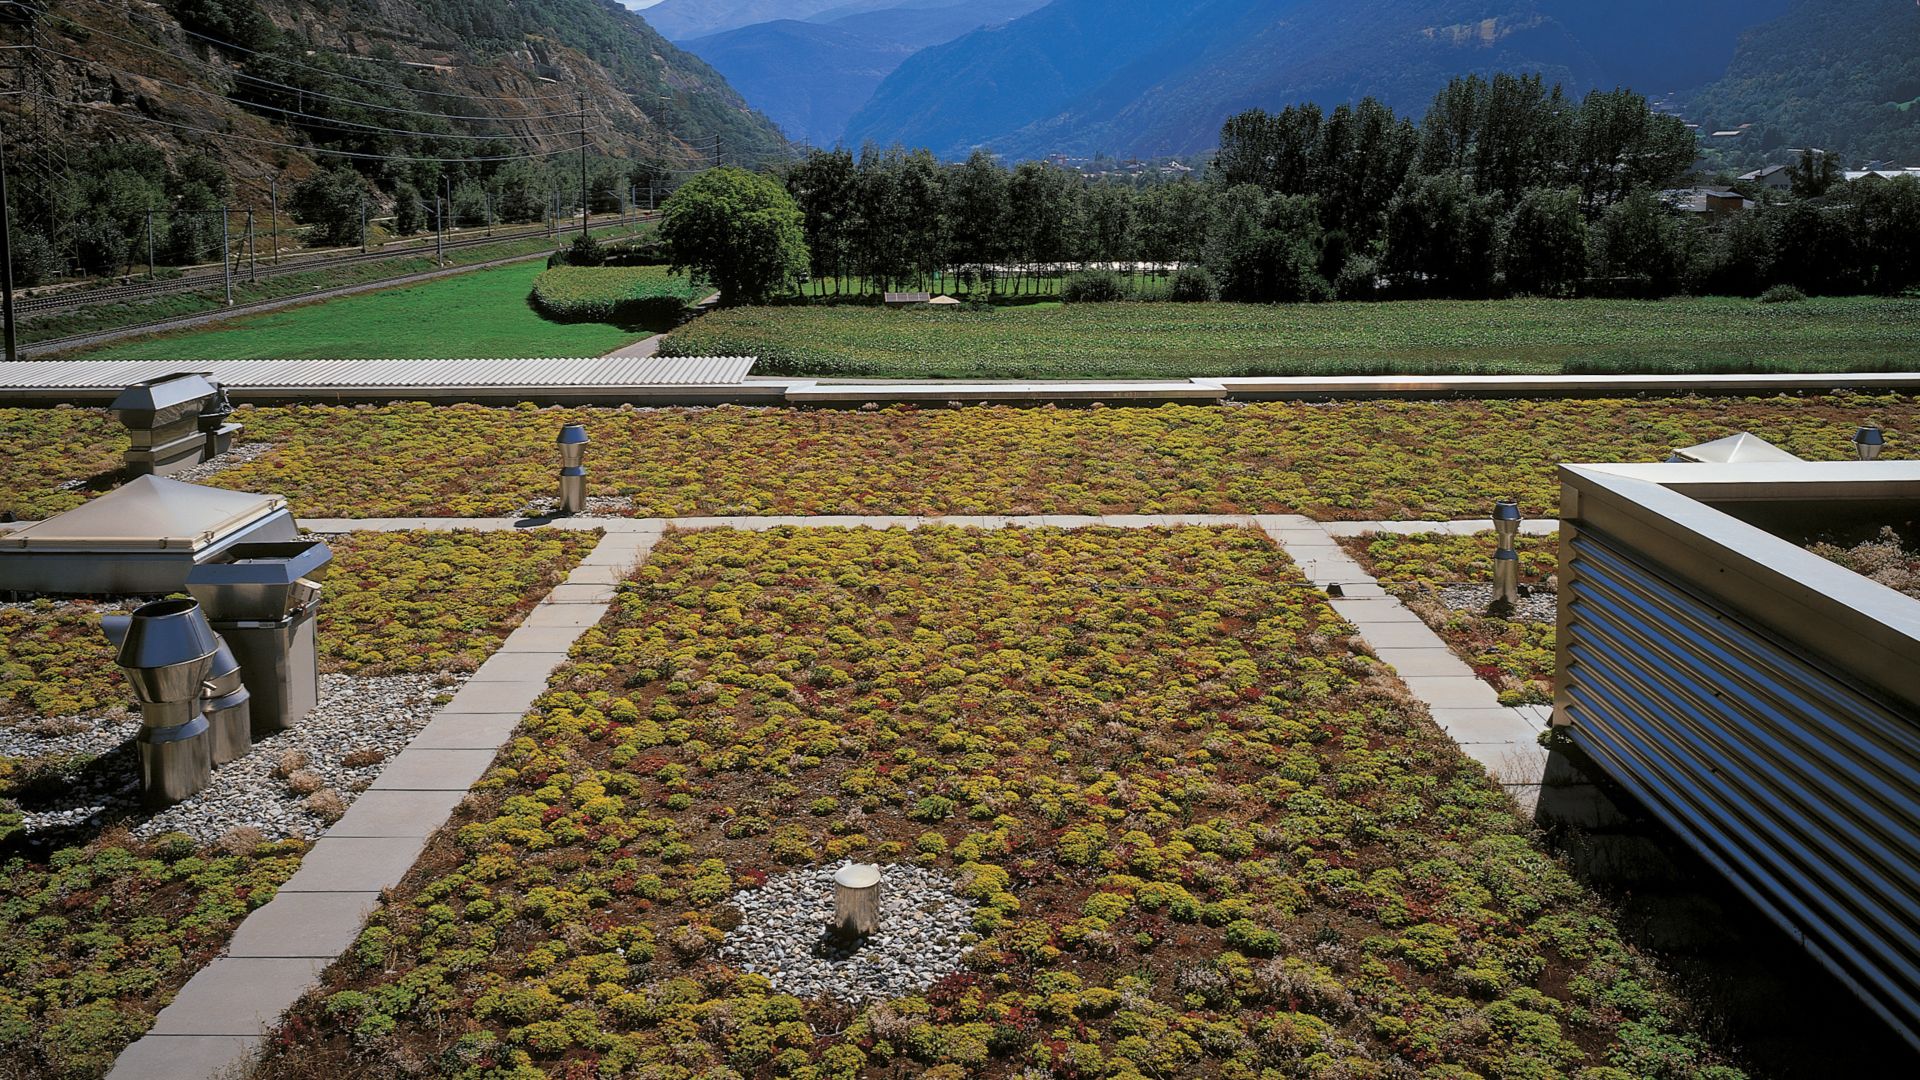 Extensive green roof with mountains in background